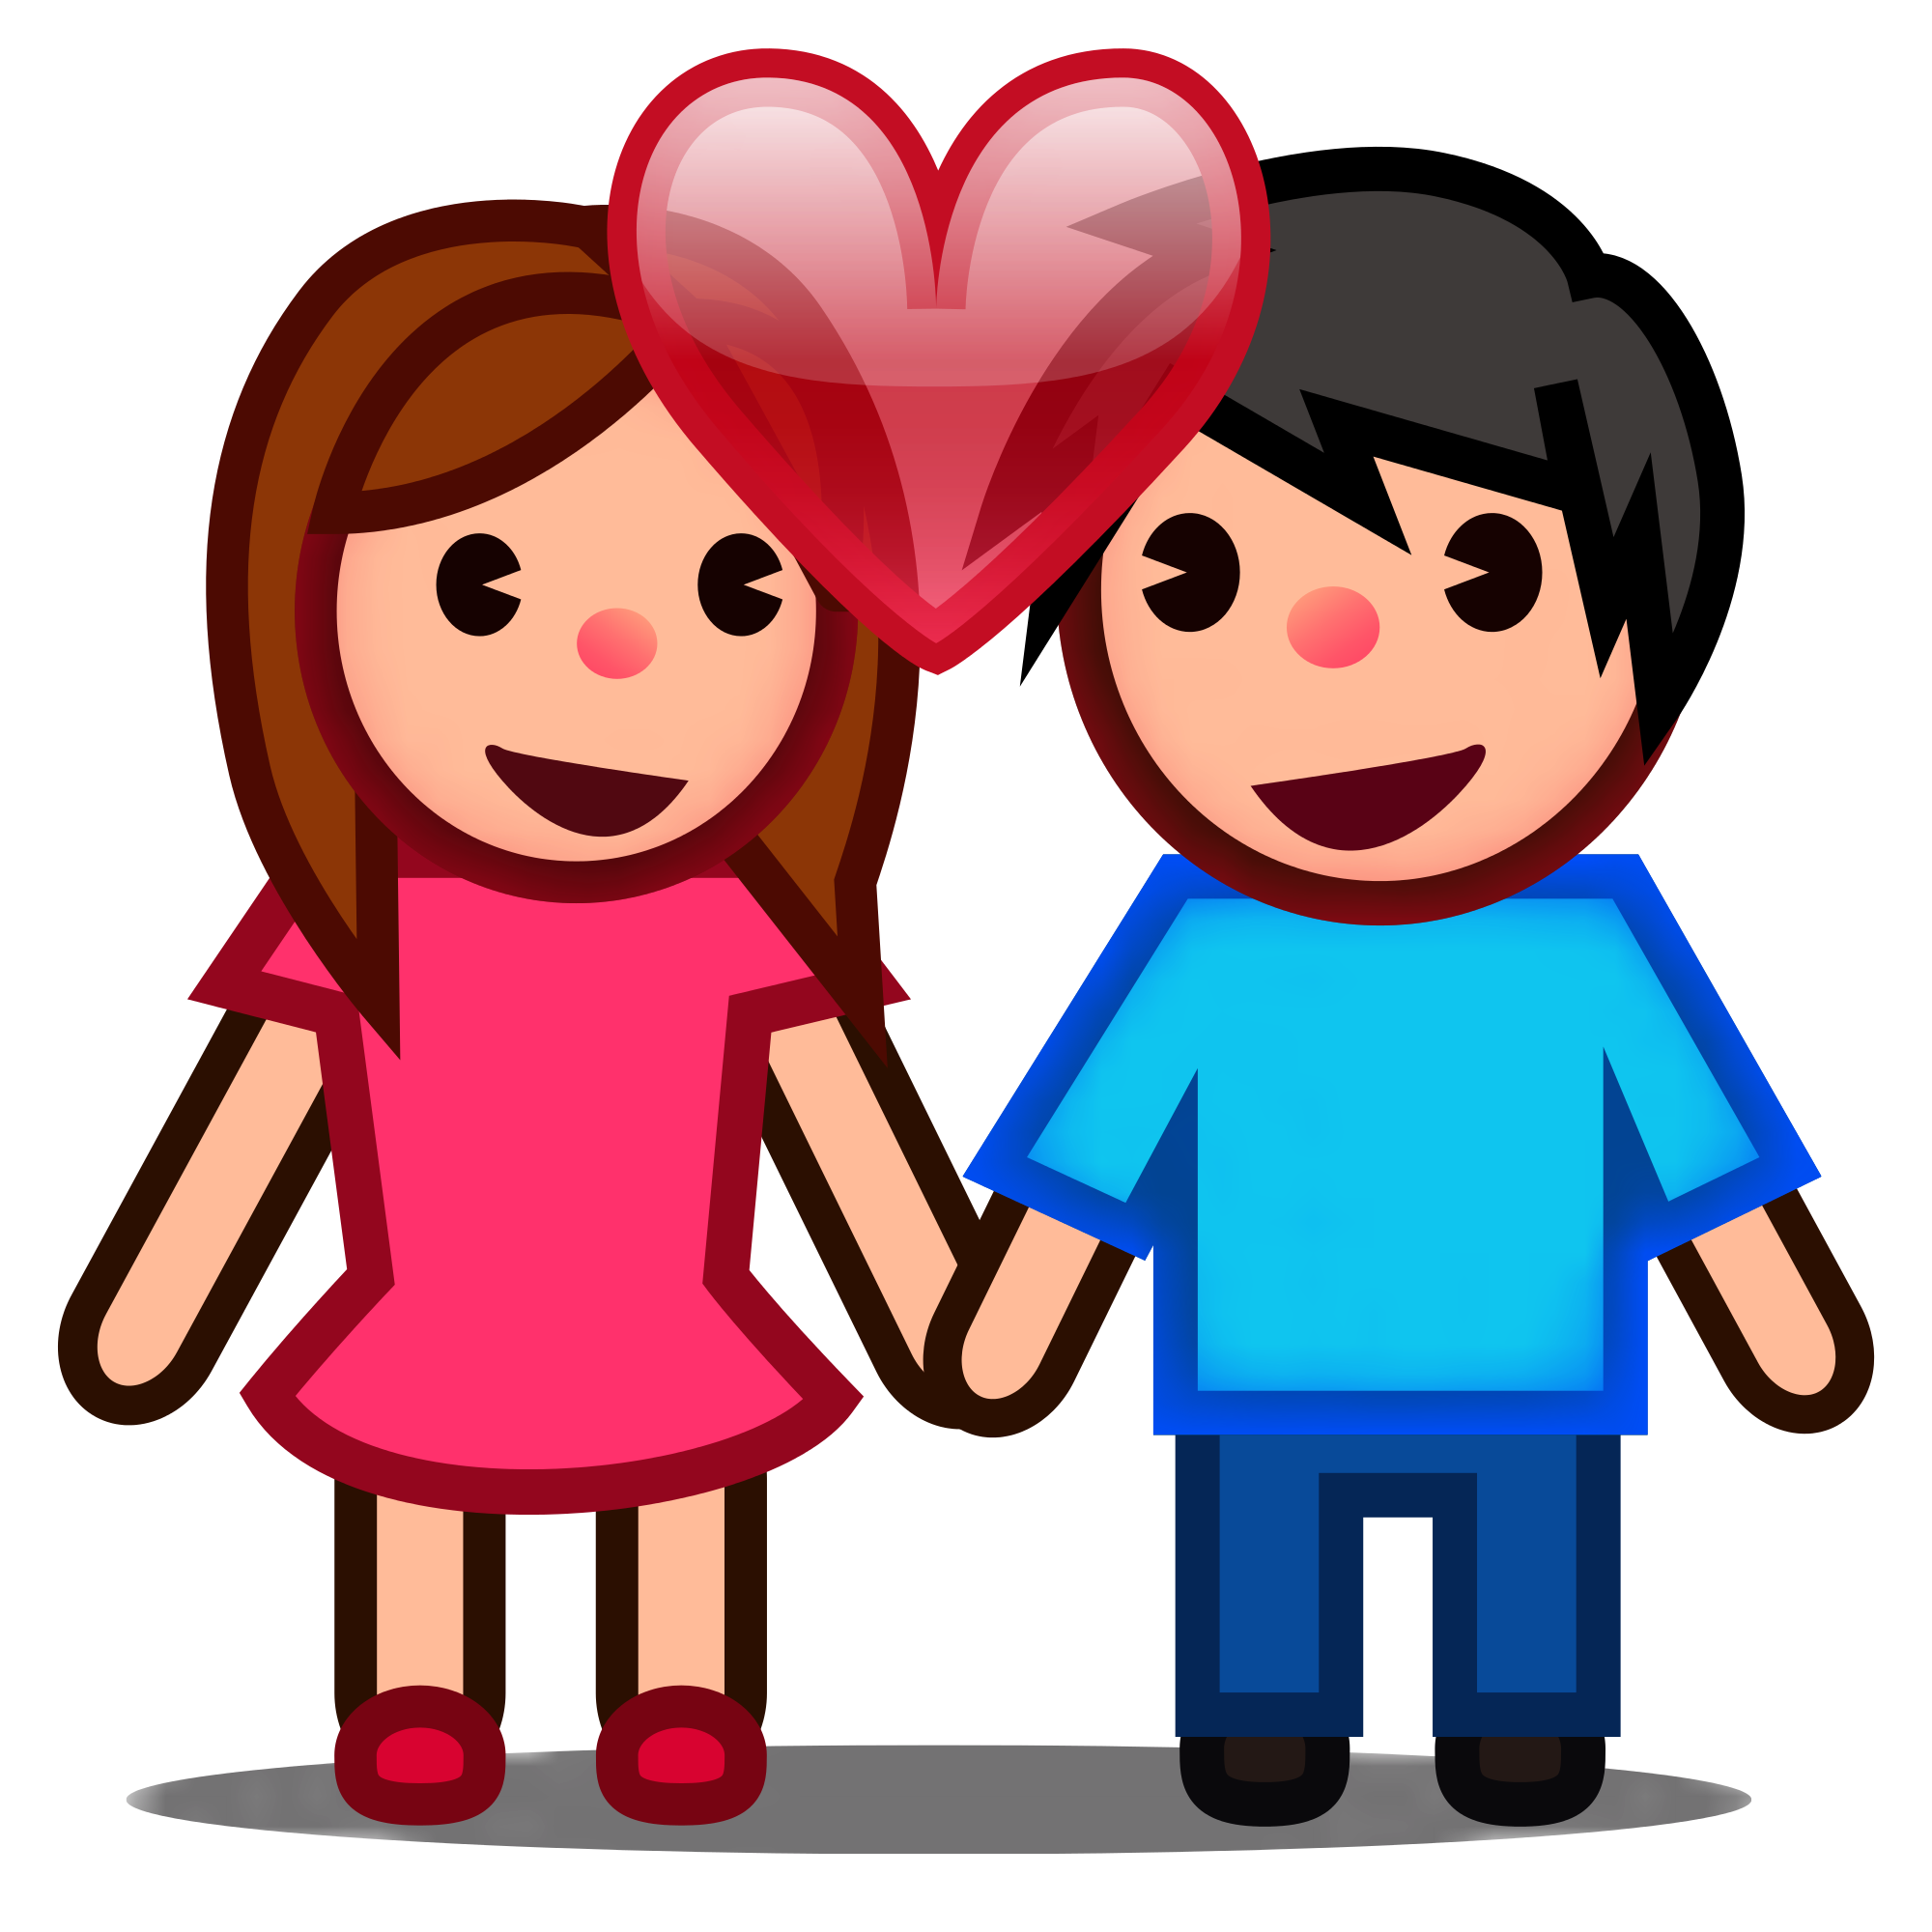 Love Couple Cartoon Images Download : Images Of Cartoon Love Couple ...